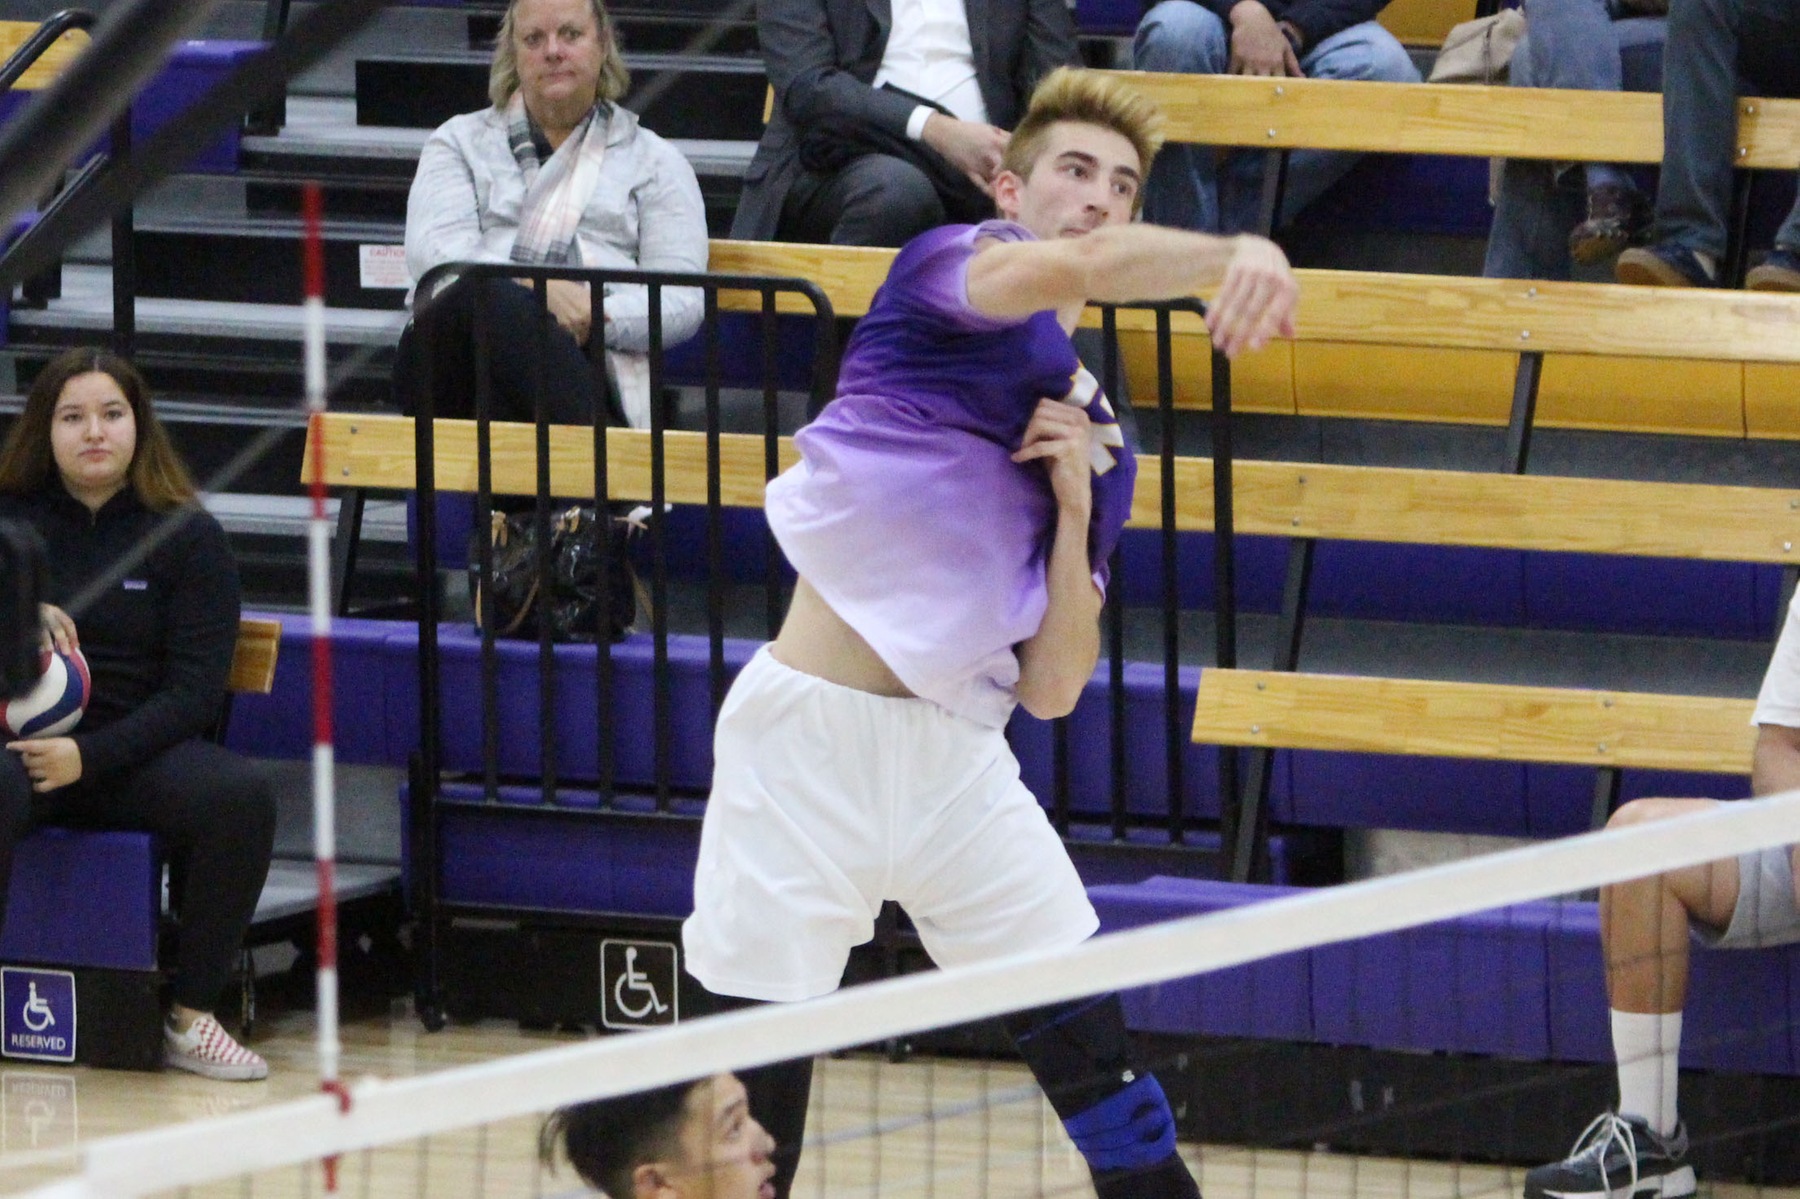 Andrew Reina tallied eight kills as the Kingsmen defeated the Arcadia Knights 3-0. (Photo: Danielle Roumbos)